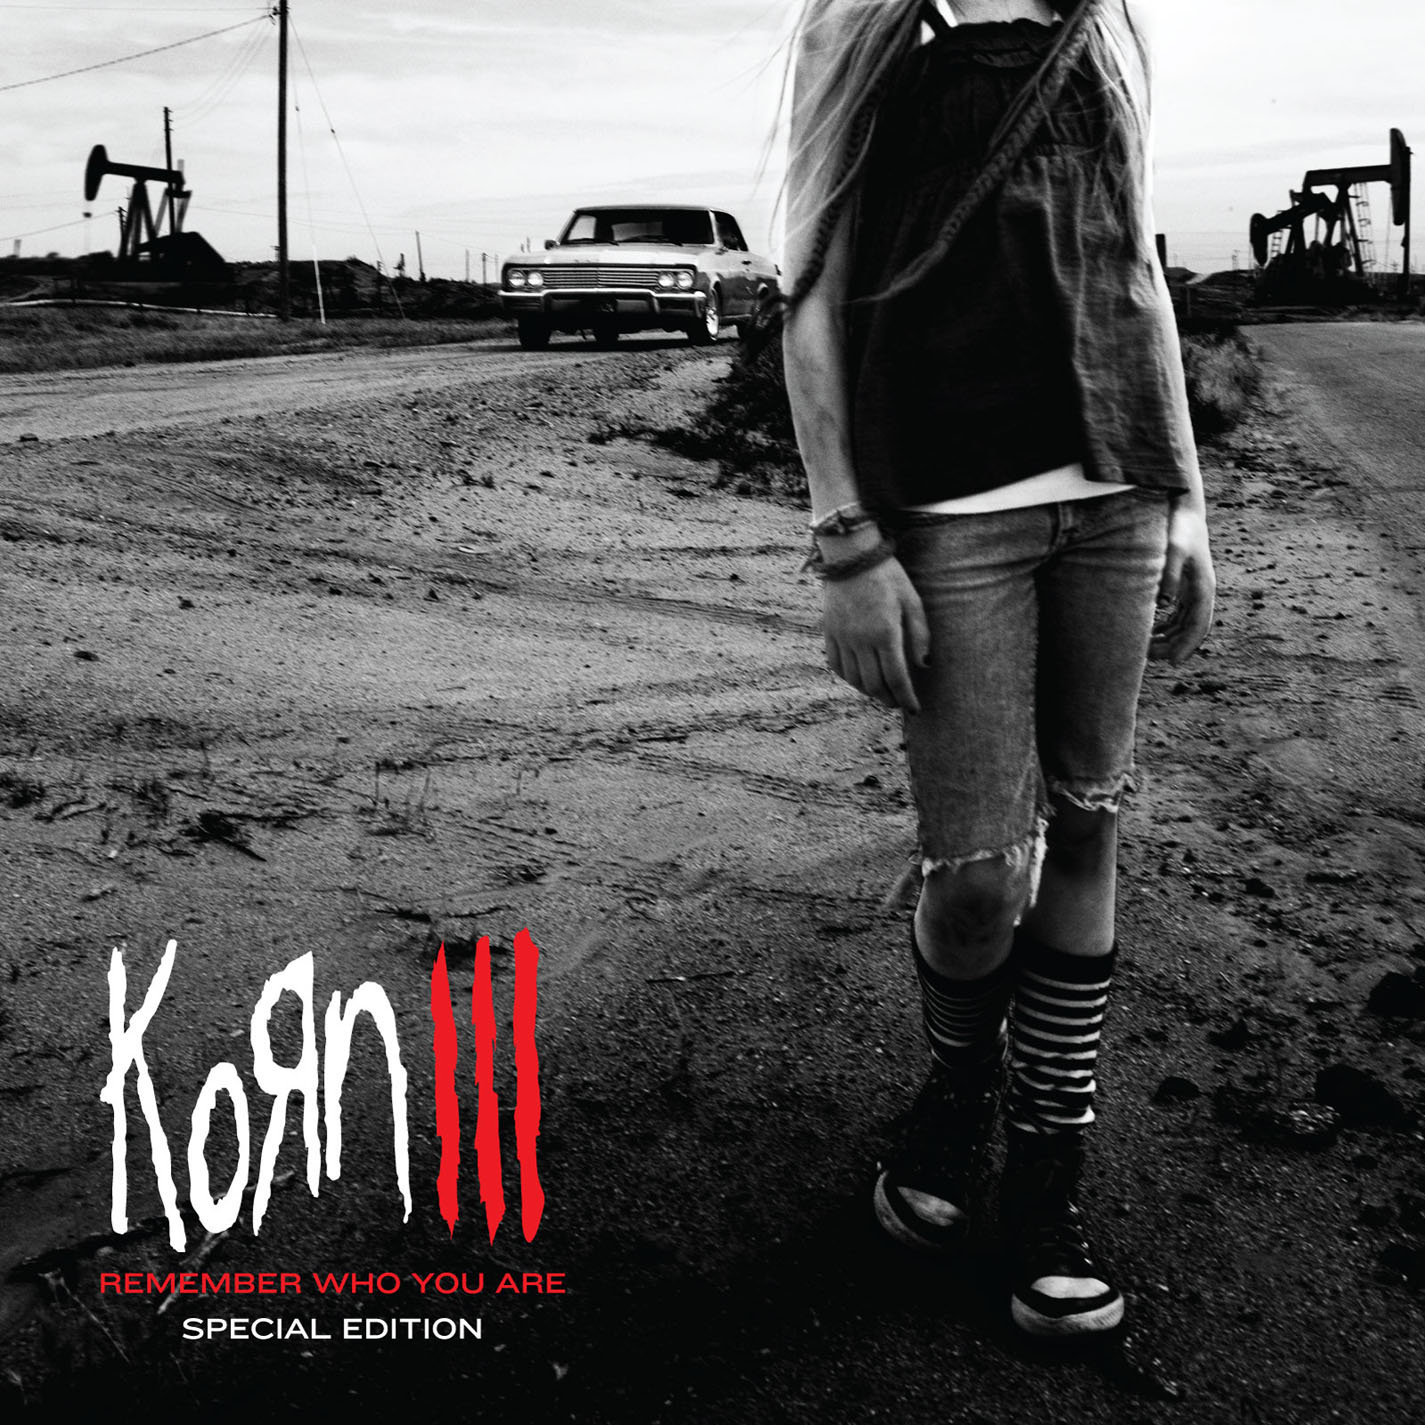 Download Korn Wallpaper - Korn Iii Remember Who You Are Special Edition , HD Wallpaper & Backgrounds